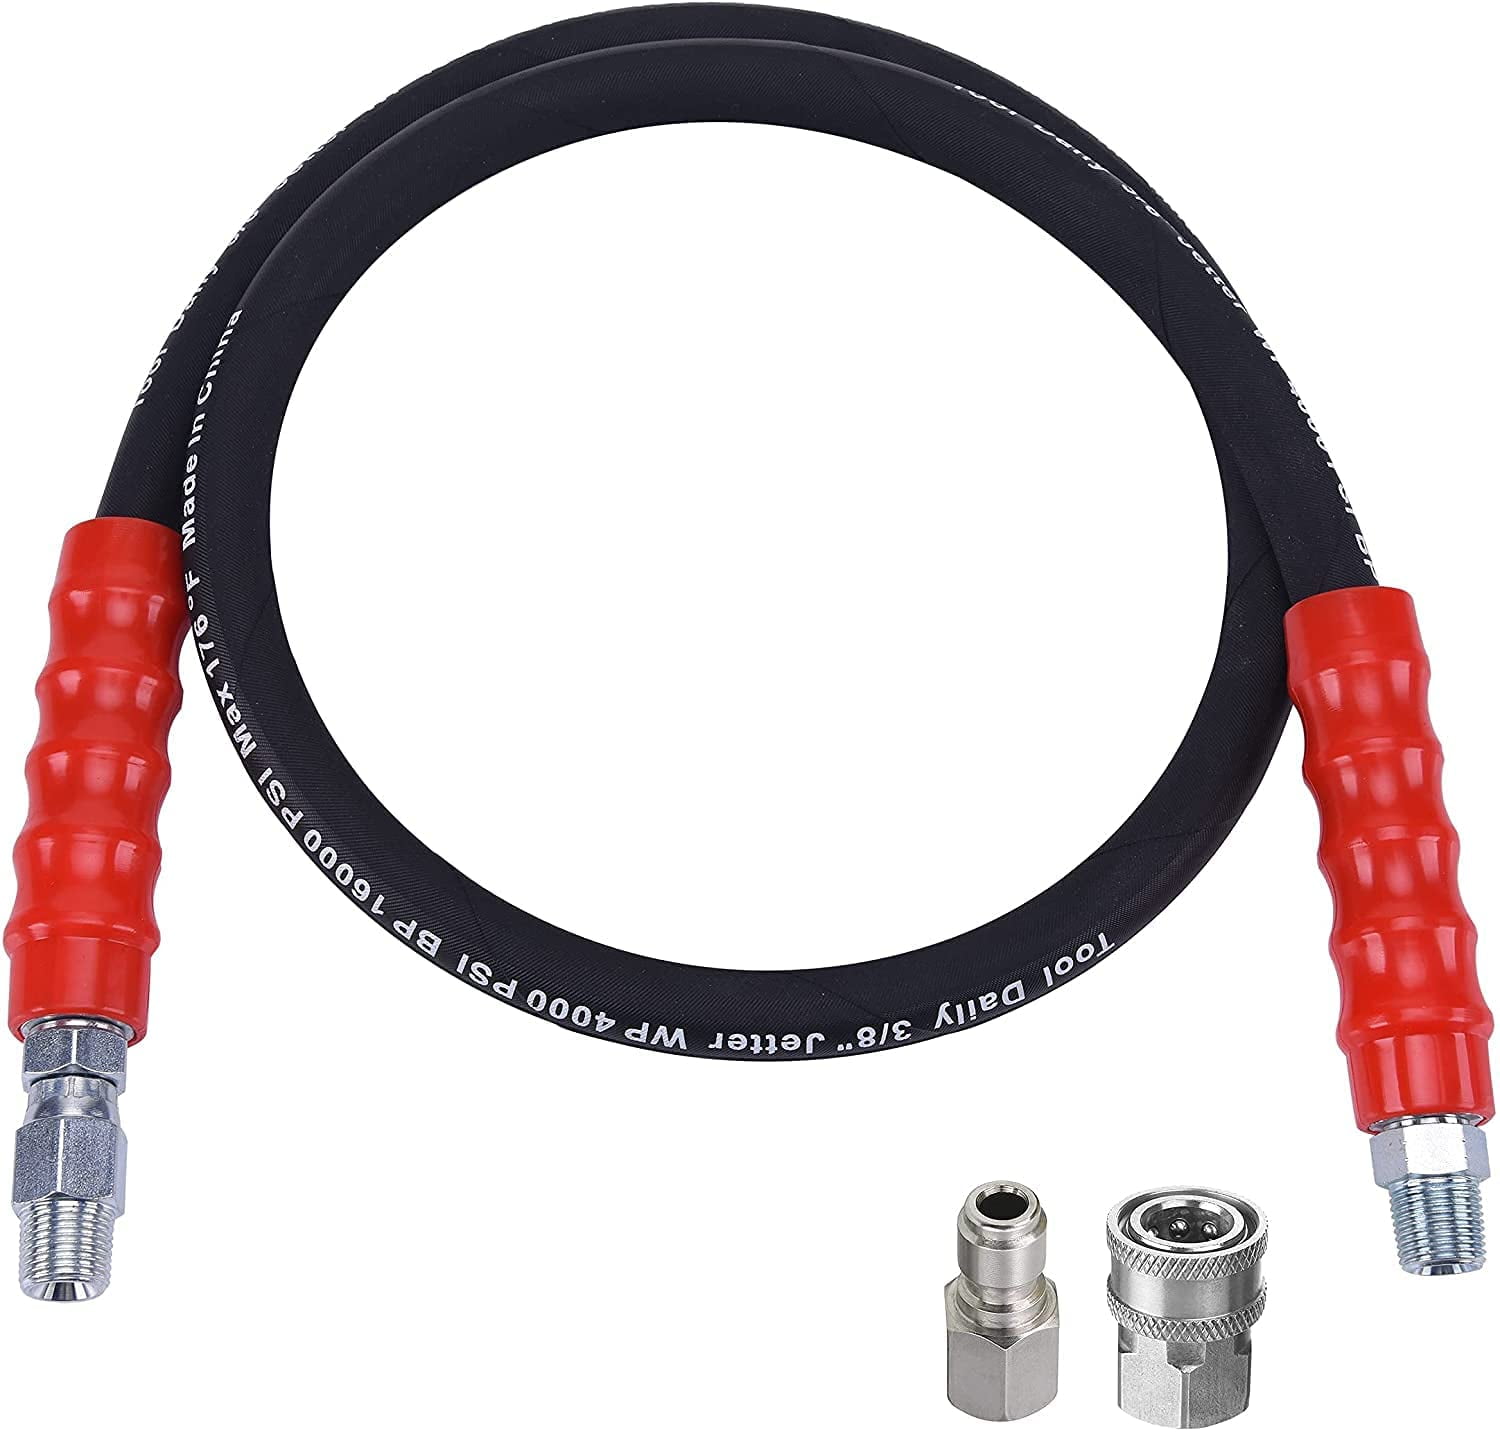 High Tensile Wire Braid Pressure Hose 4200 PSI Hose Reel Connector Hose for Pressure Washing 5 POHIR Pressure Washer Whip Hose 5 FT Short Power Washer Hose with 3/8'' Quick Connect Adapter Set 